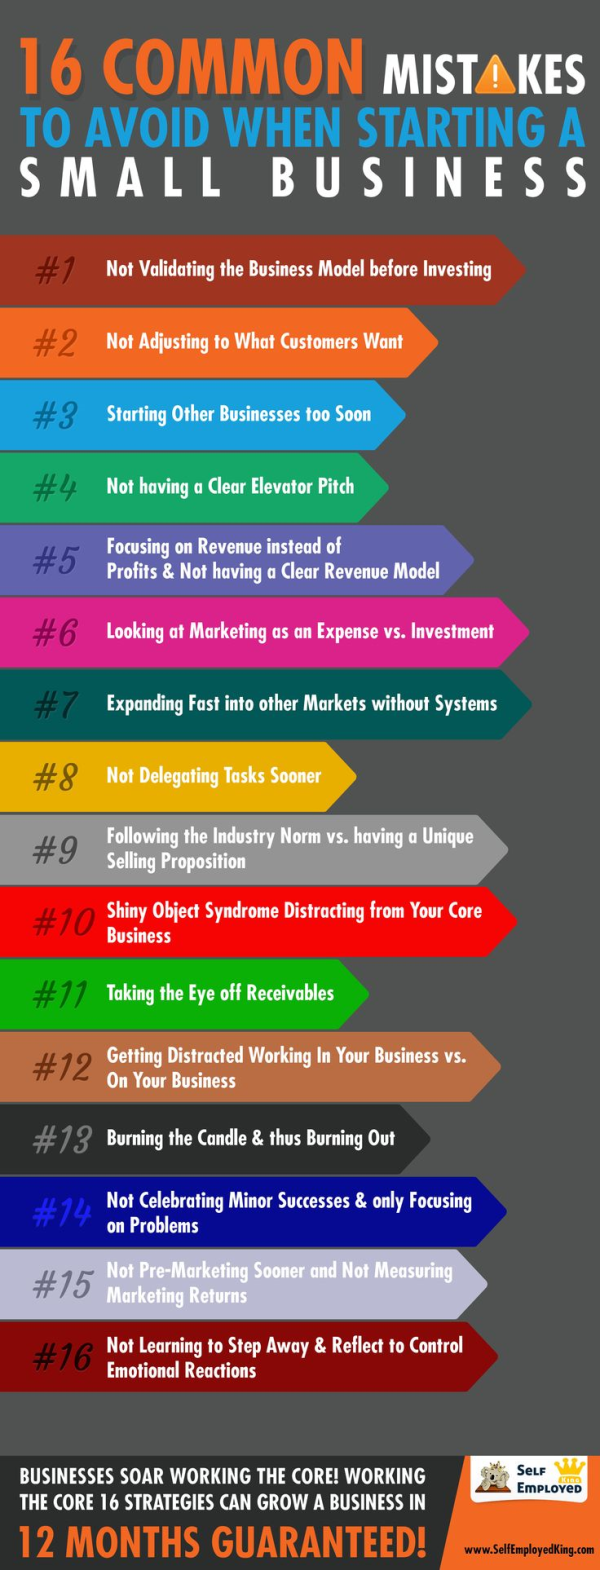 [Infographic] Common Mistakes When Starting a Small Business